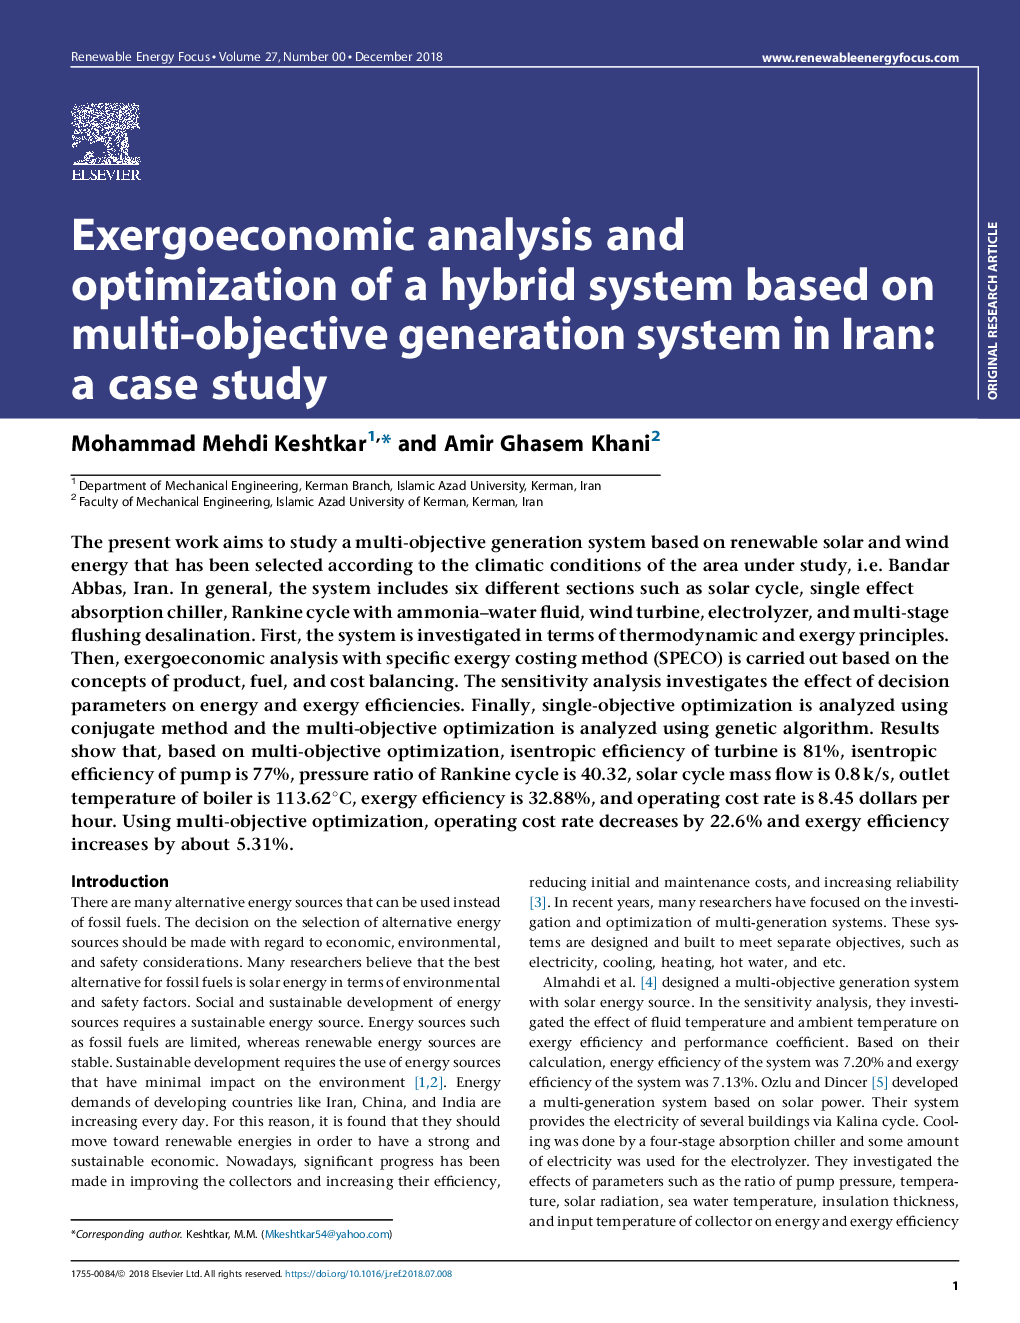 Exergoeconomic analysis and optimization of a hybrid system based on multi-objective generation system in Iran: a case study